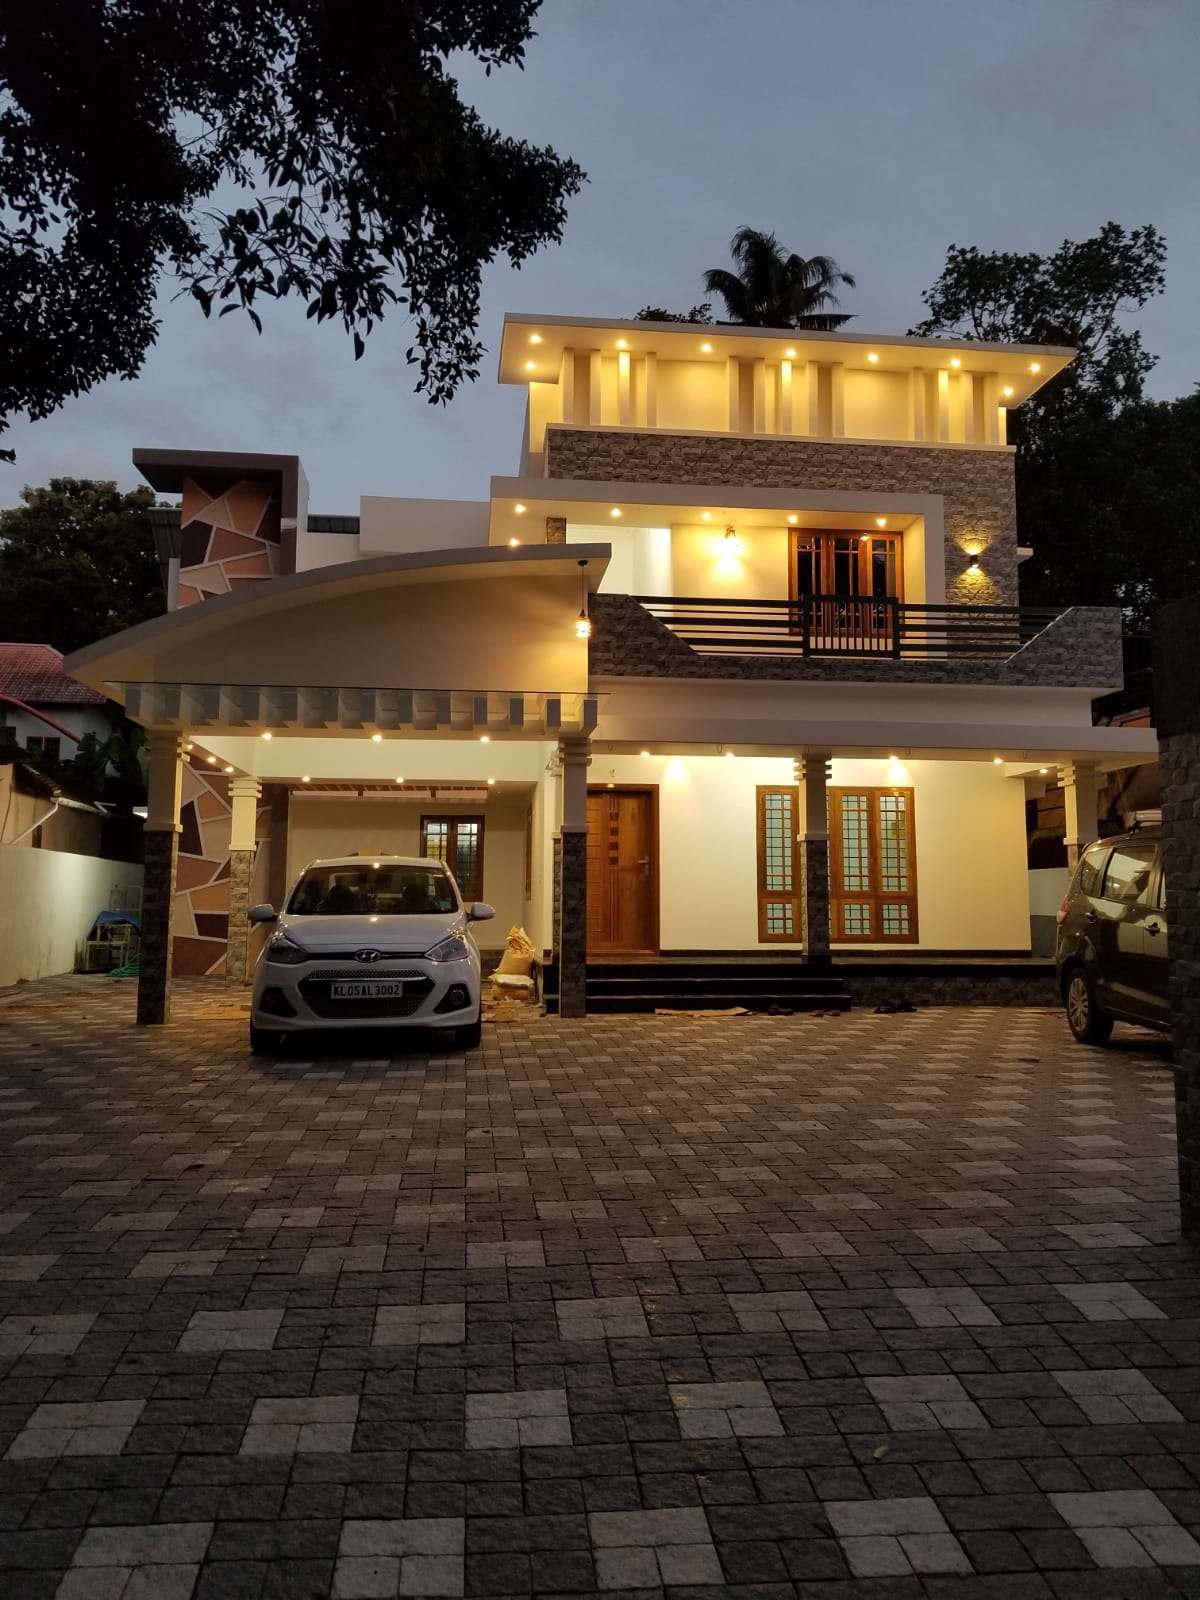 Newly constructed 4 BHK (2850 sq.ft) luxury home for sale at Changanasherry. 
Contact 8848493908 for more details.
.
.
#home #luxuryrealestate #InteriorDesigner #Designs 
#forsale #saleofproperty 
#Kottayam #builders
#changanacherry